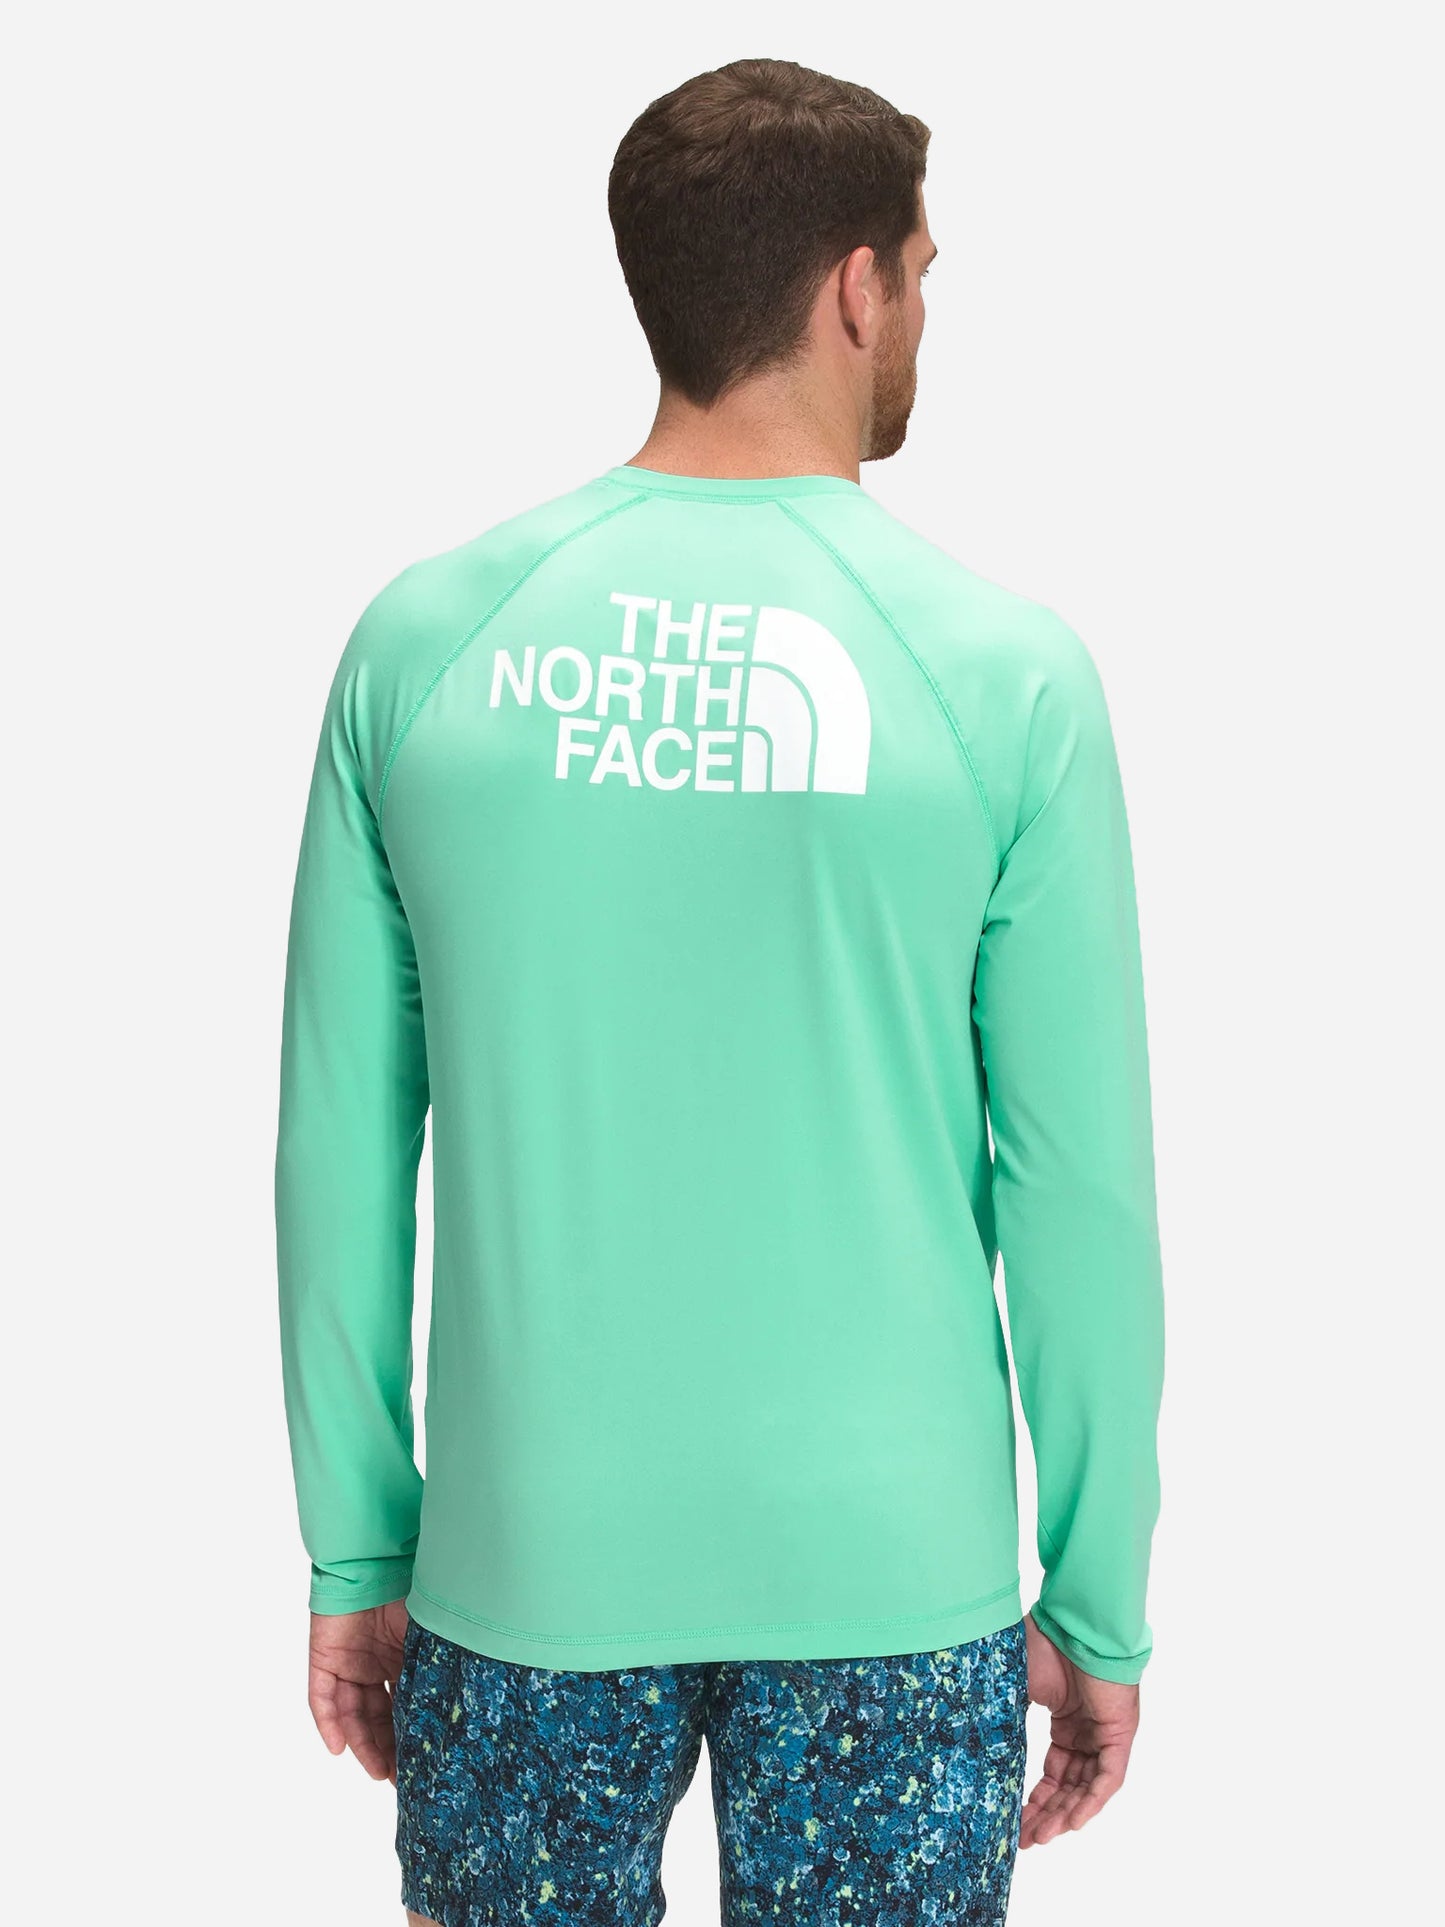 The North Face Men’s Class V Water Top